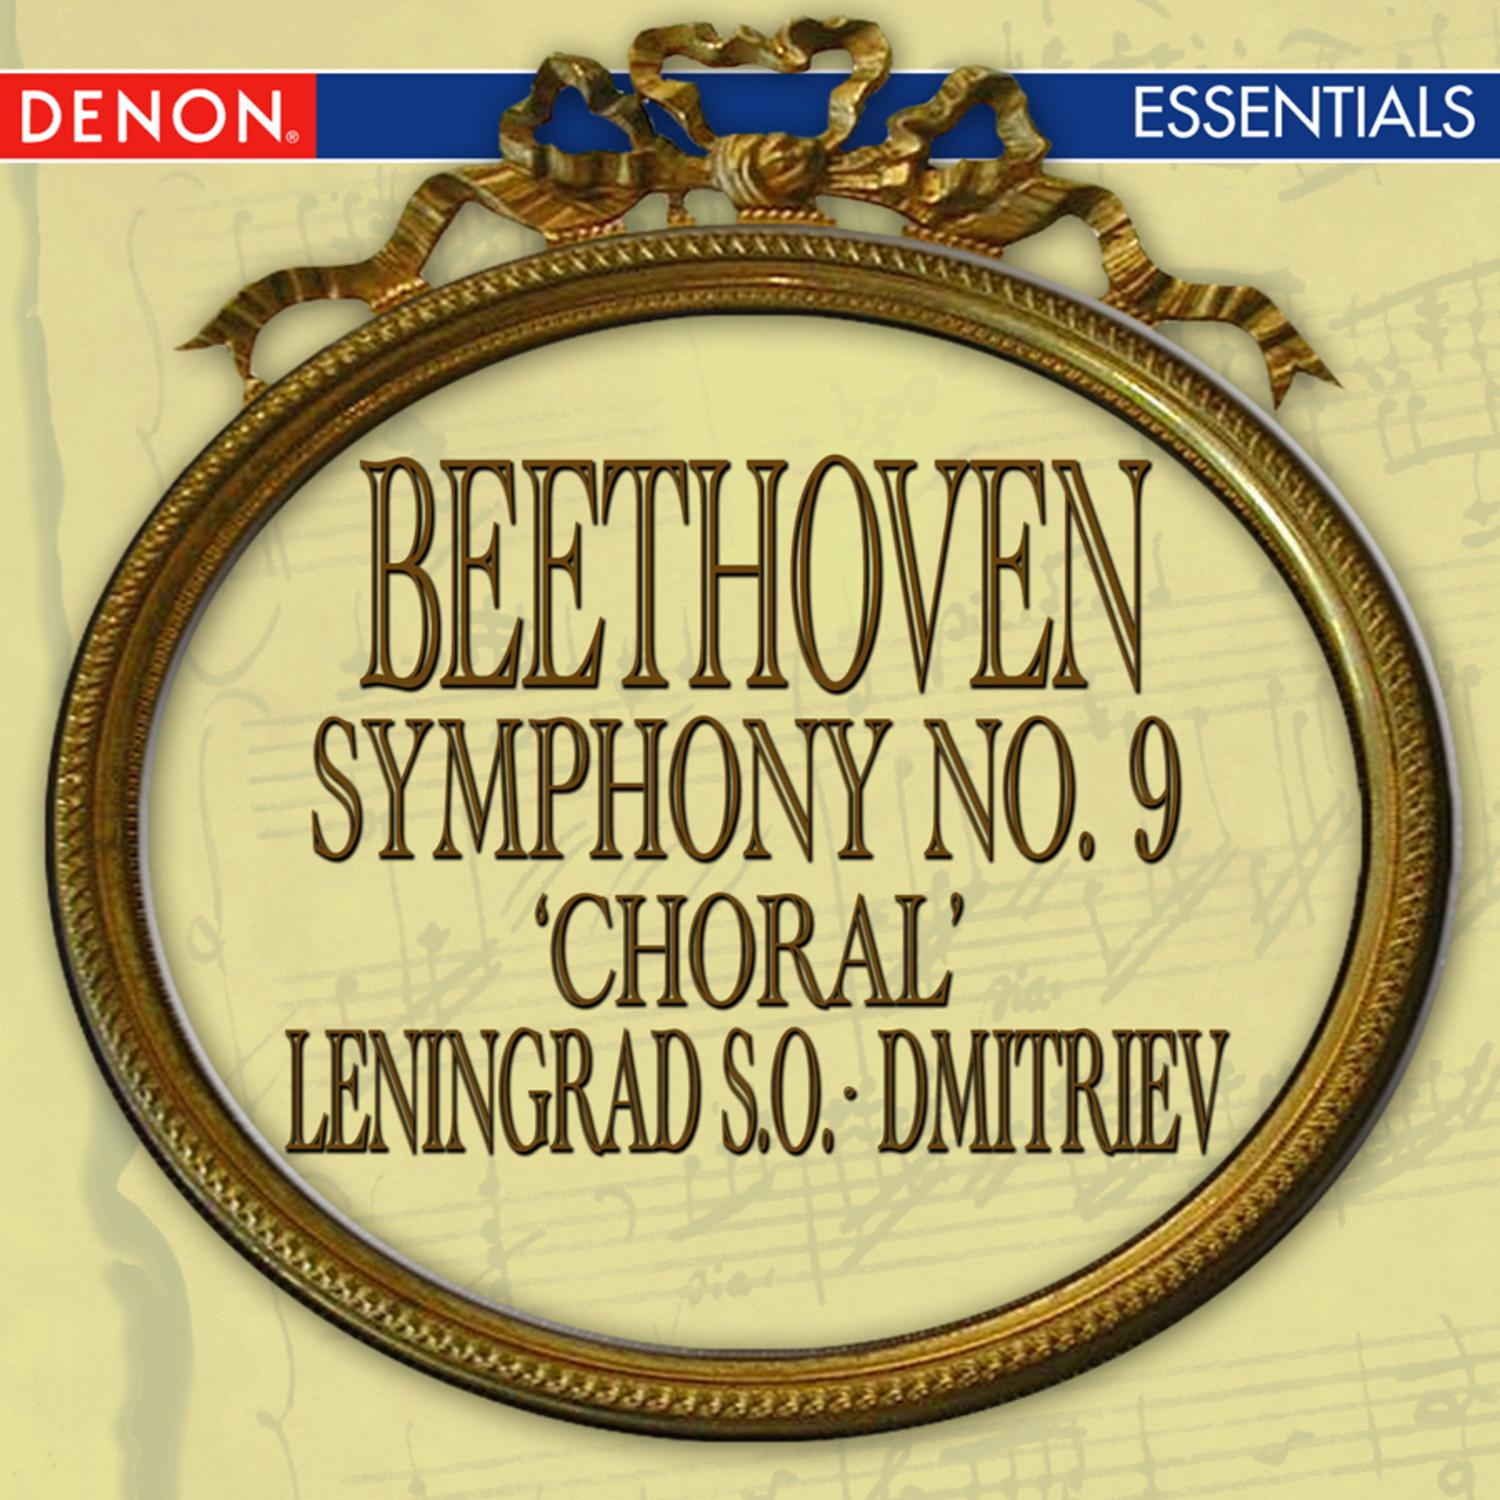 Beethoven: Symphony No. 9 "Chorale"